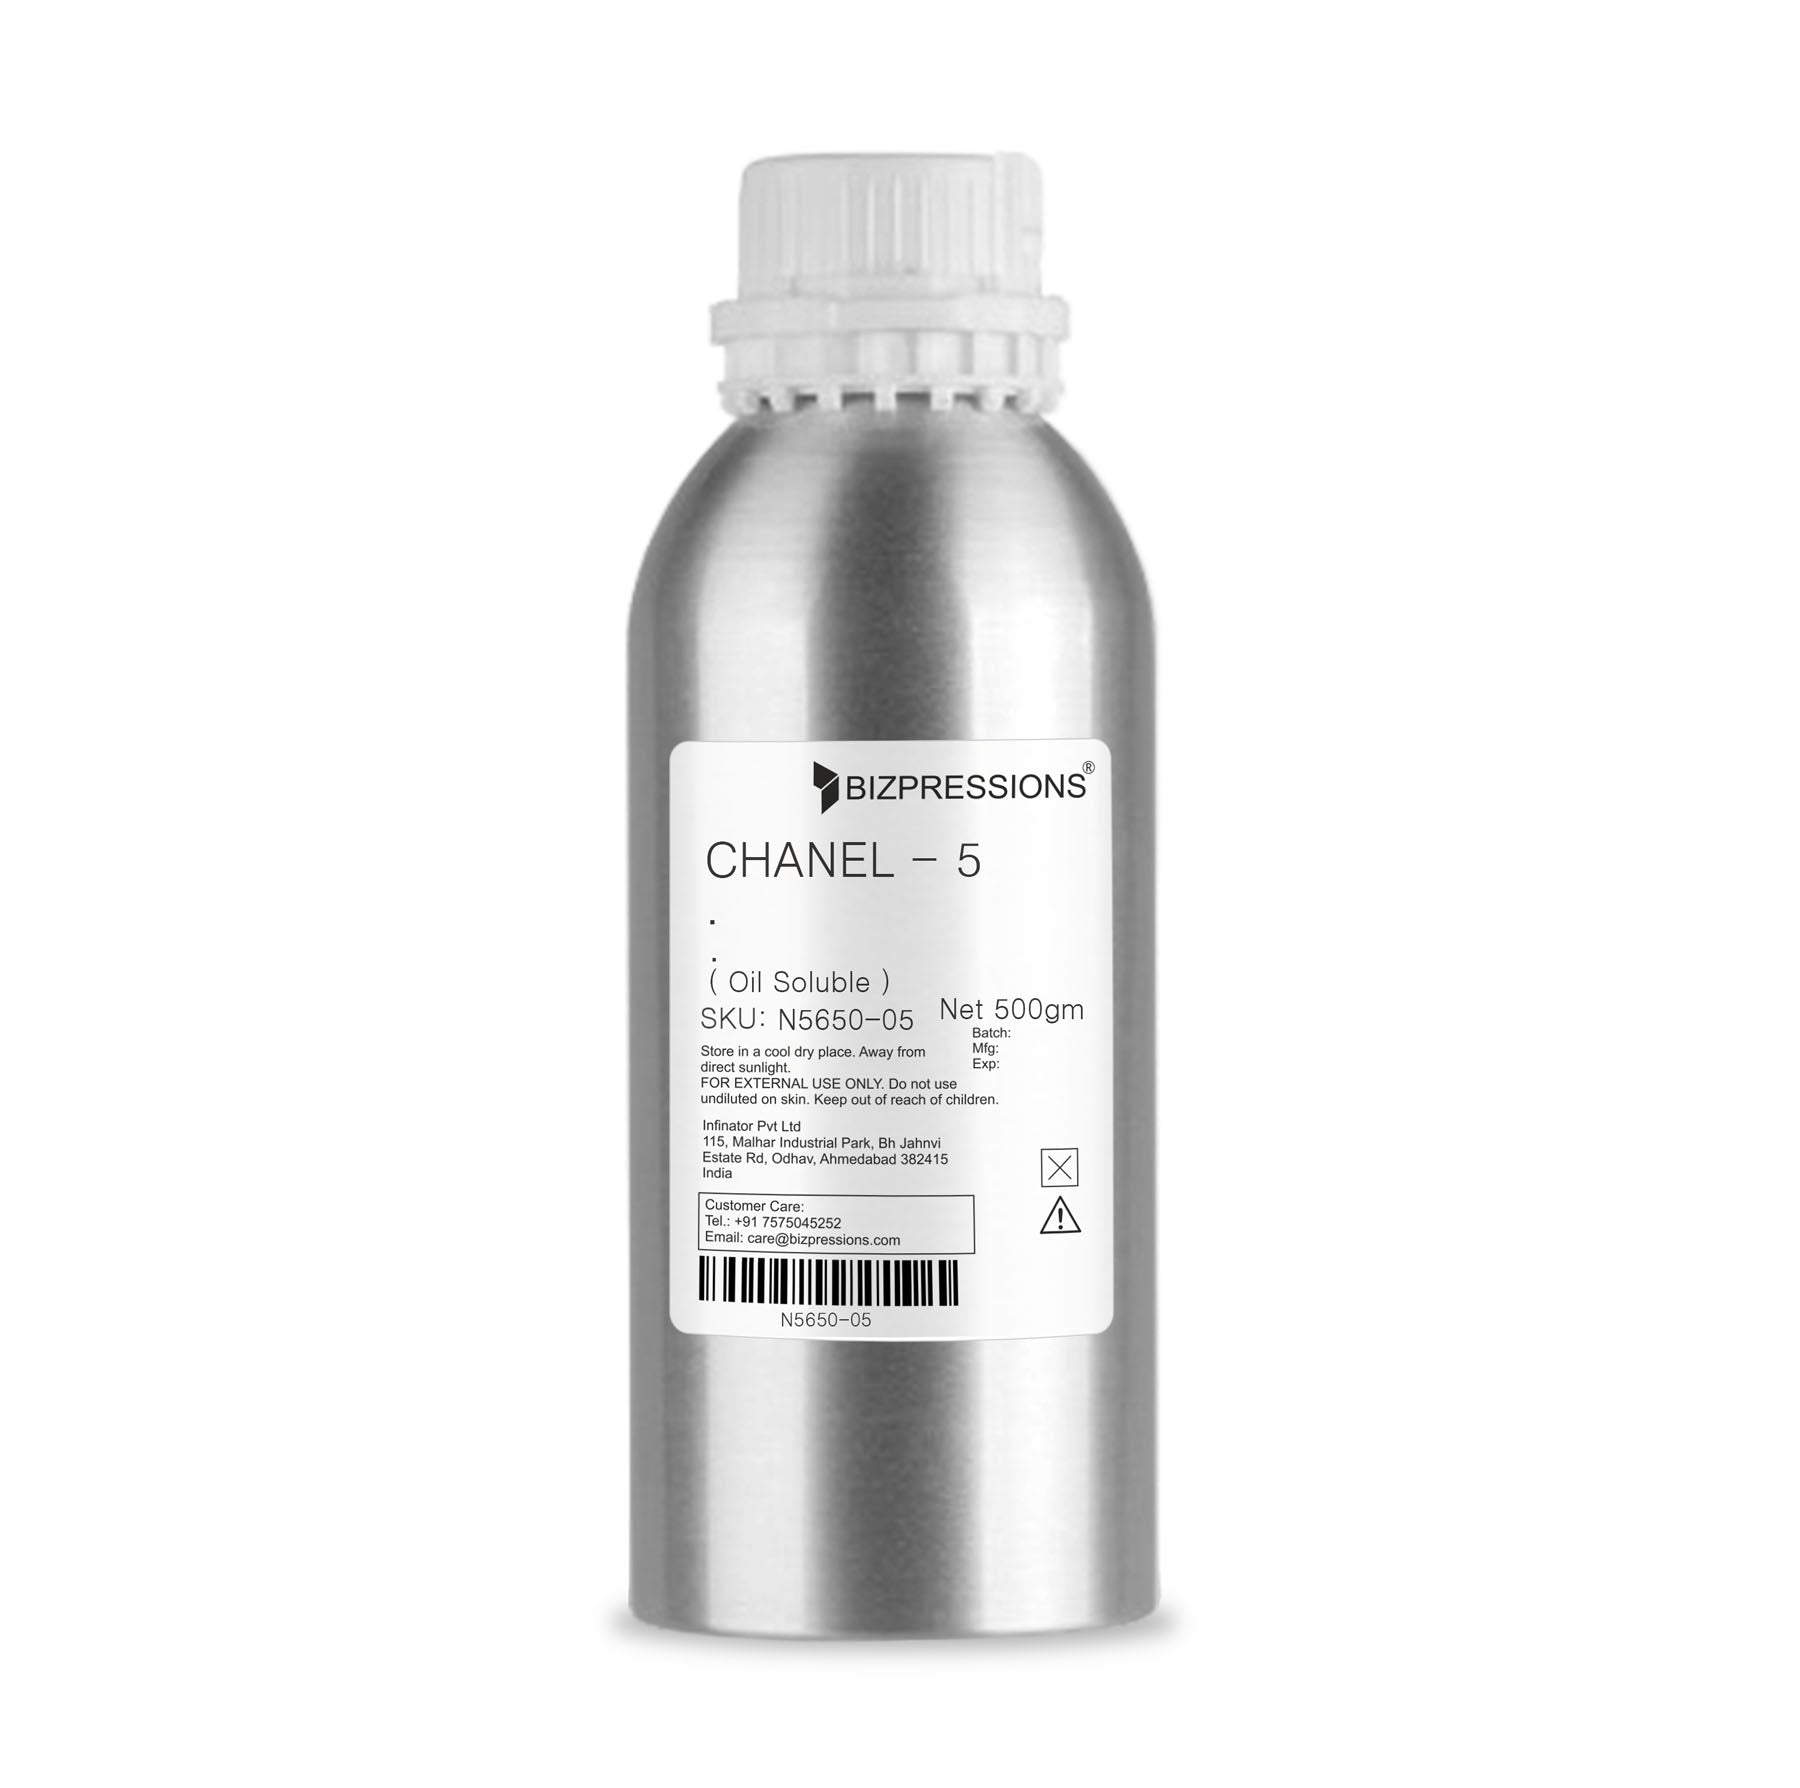 CHANEL - 5 - Fragrance ( Oil Soluble )